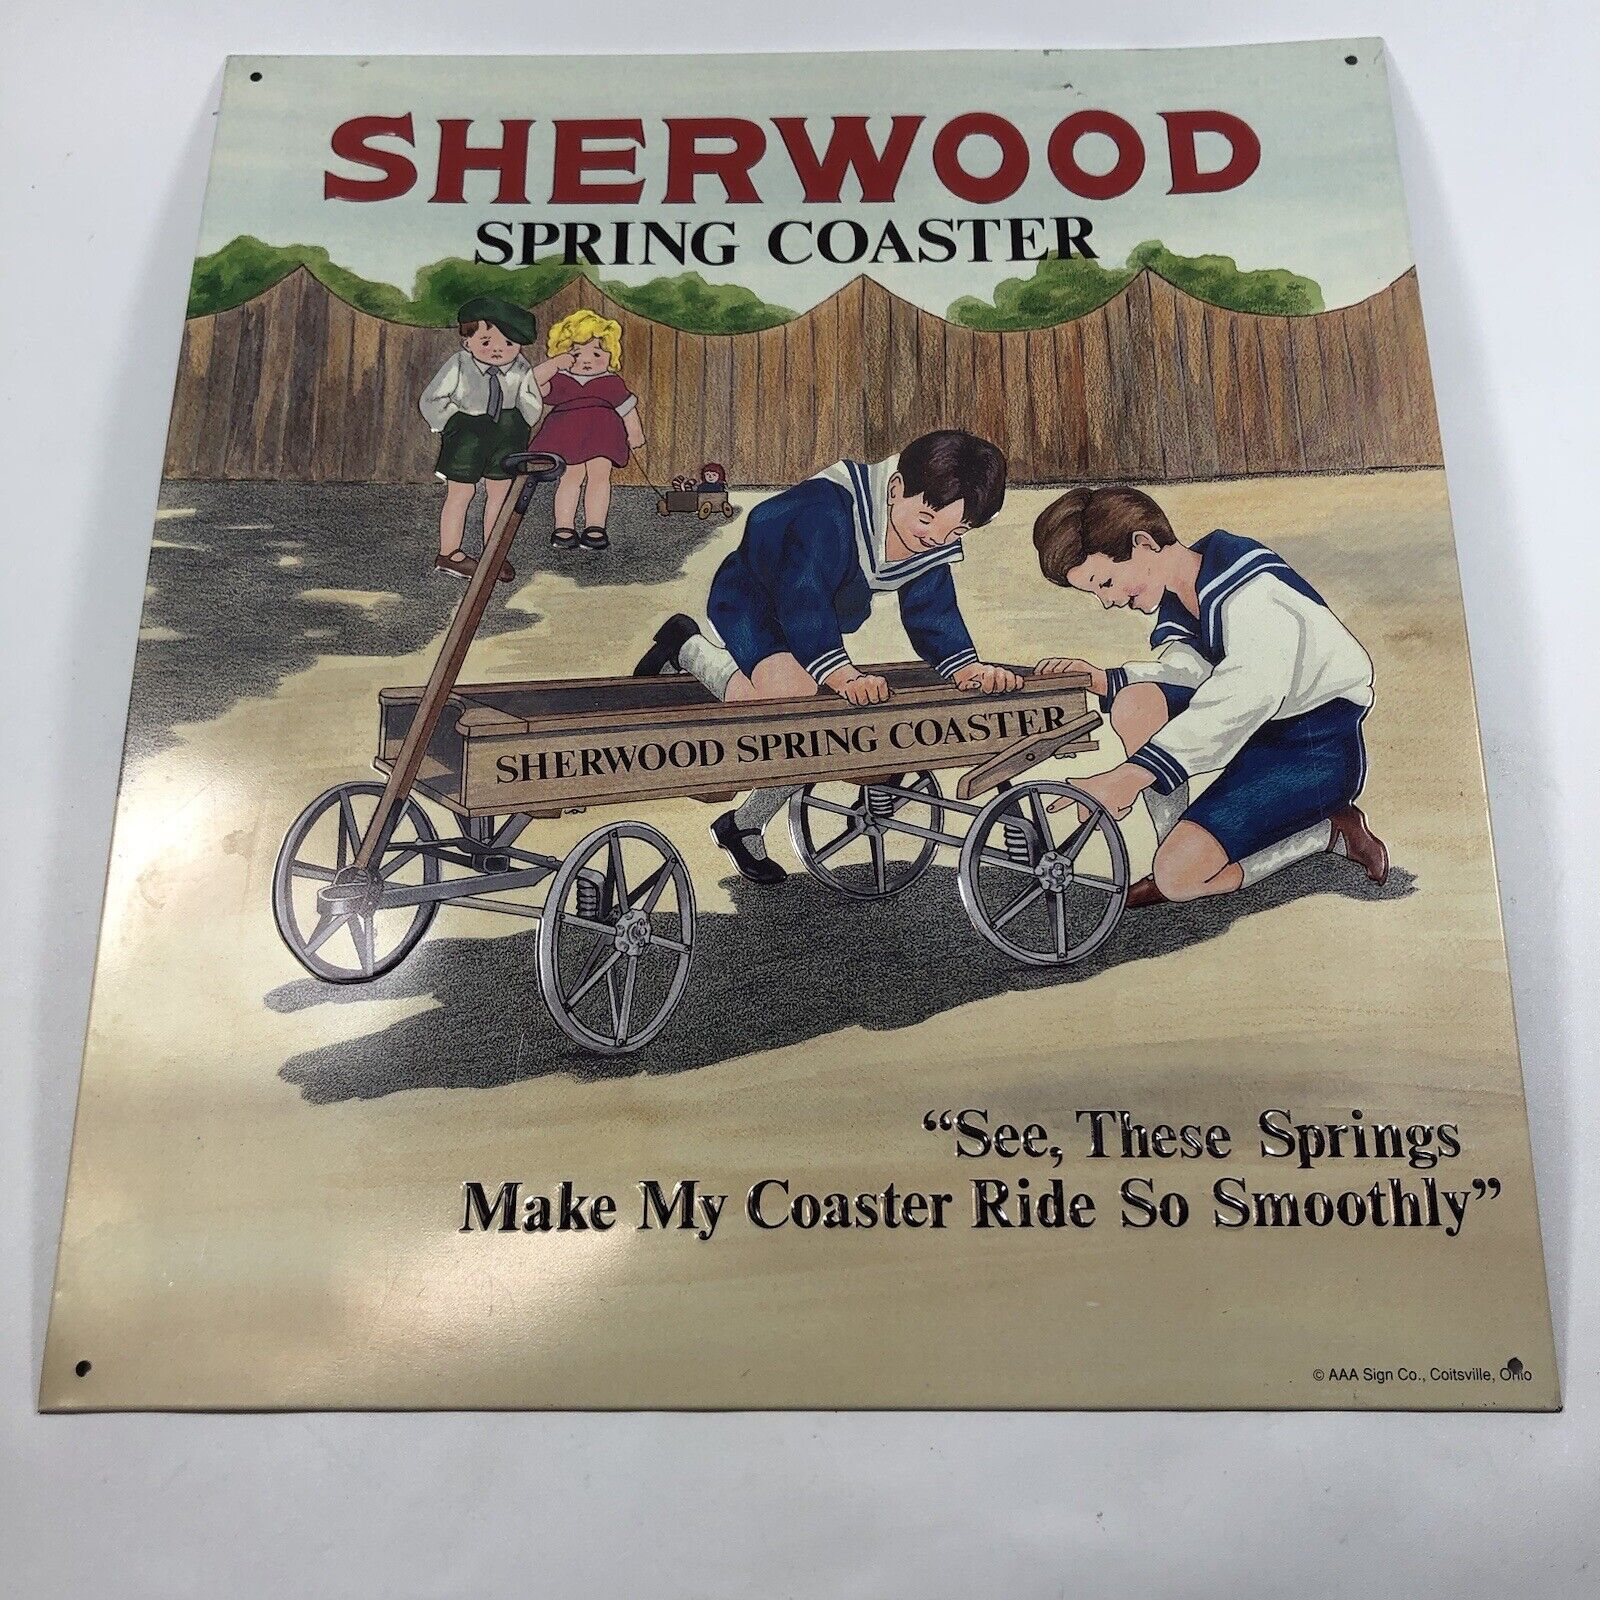 Sherwood Spring Coaster Steel Poster 14x12 Inch Vintage 1993 AAA Sign Co. Used